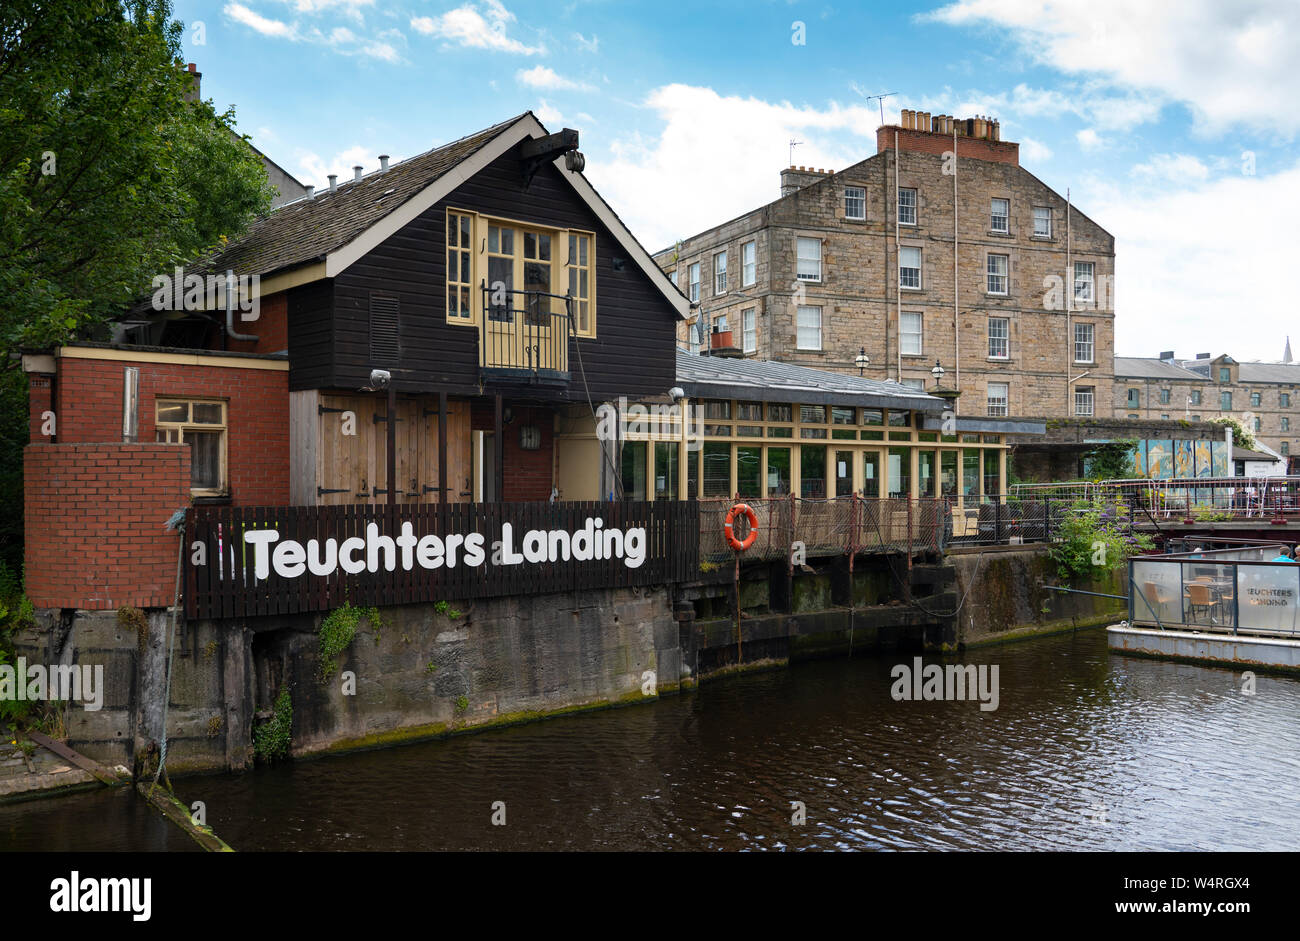 Exterior of Teuchters Landing pub in Leith, Scotland, UK Stock Photo